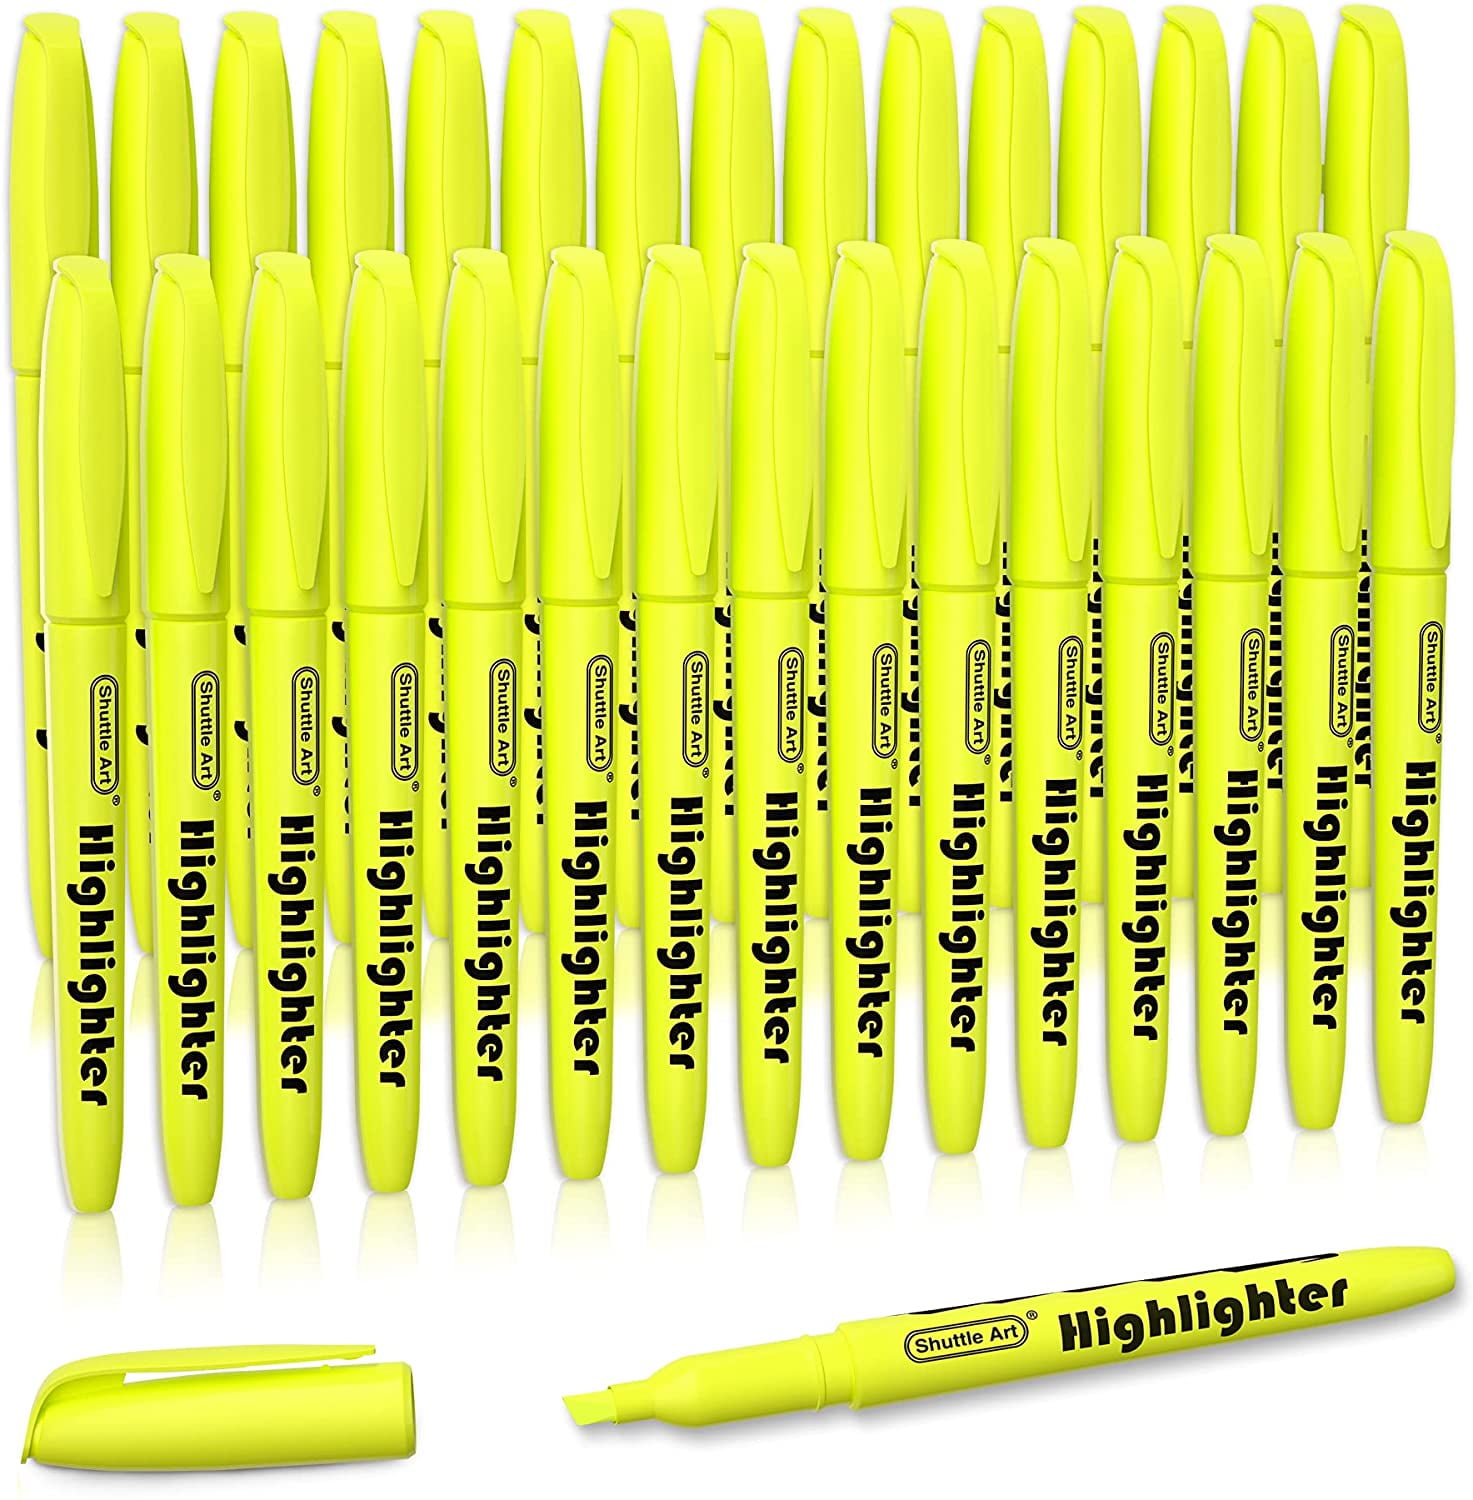 6Pc NEON HIGHLIGHTER MARKER PENS Assorted Colours Office/School/Home Pack Set 